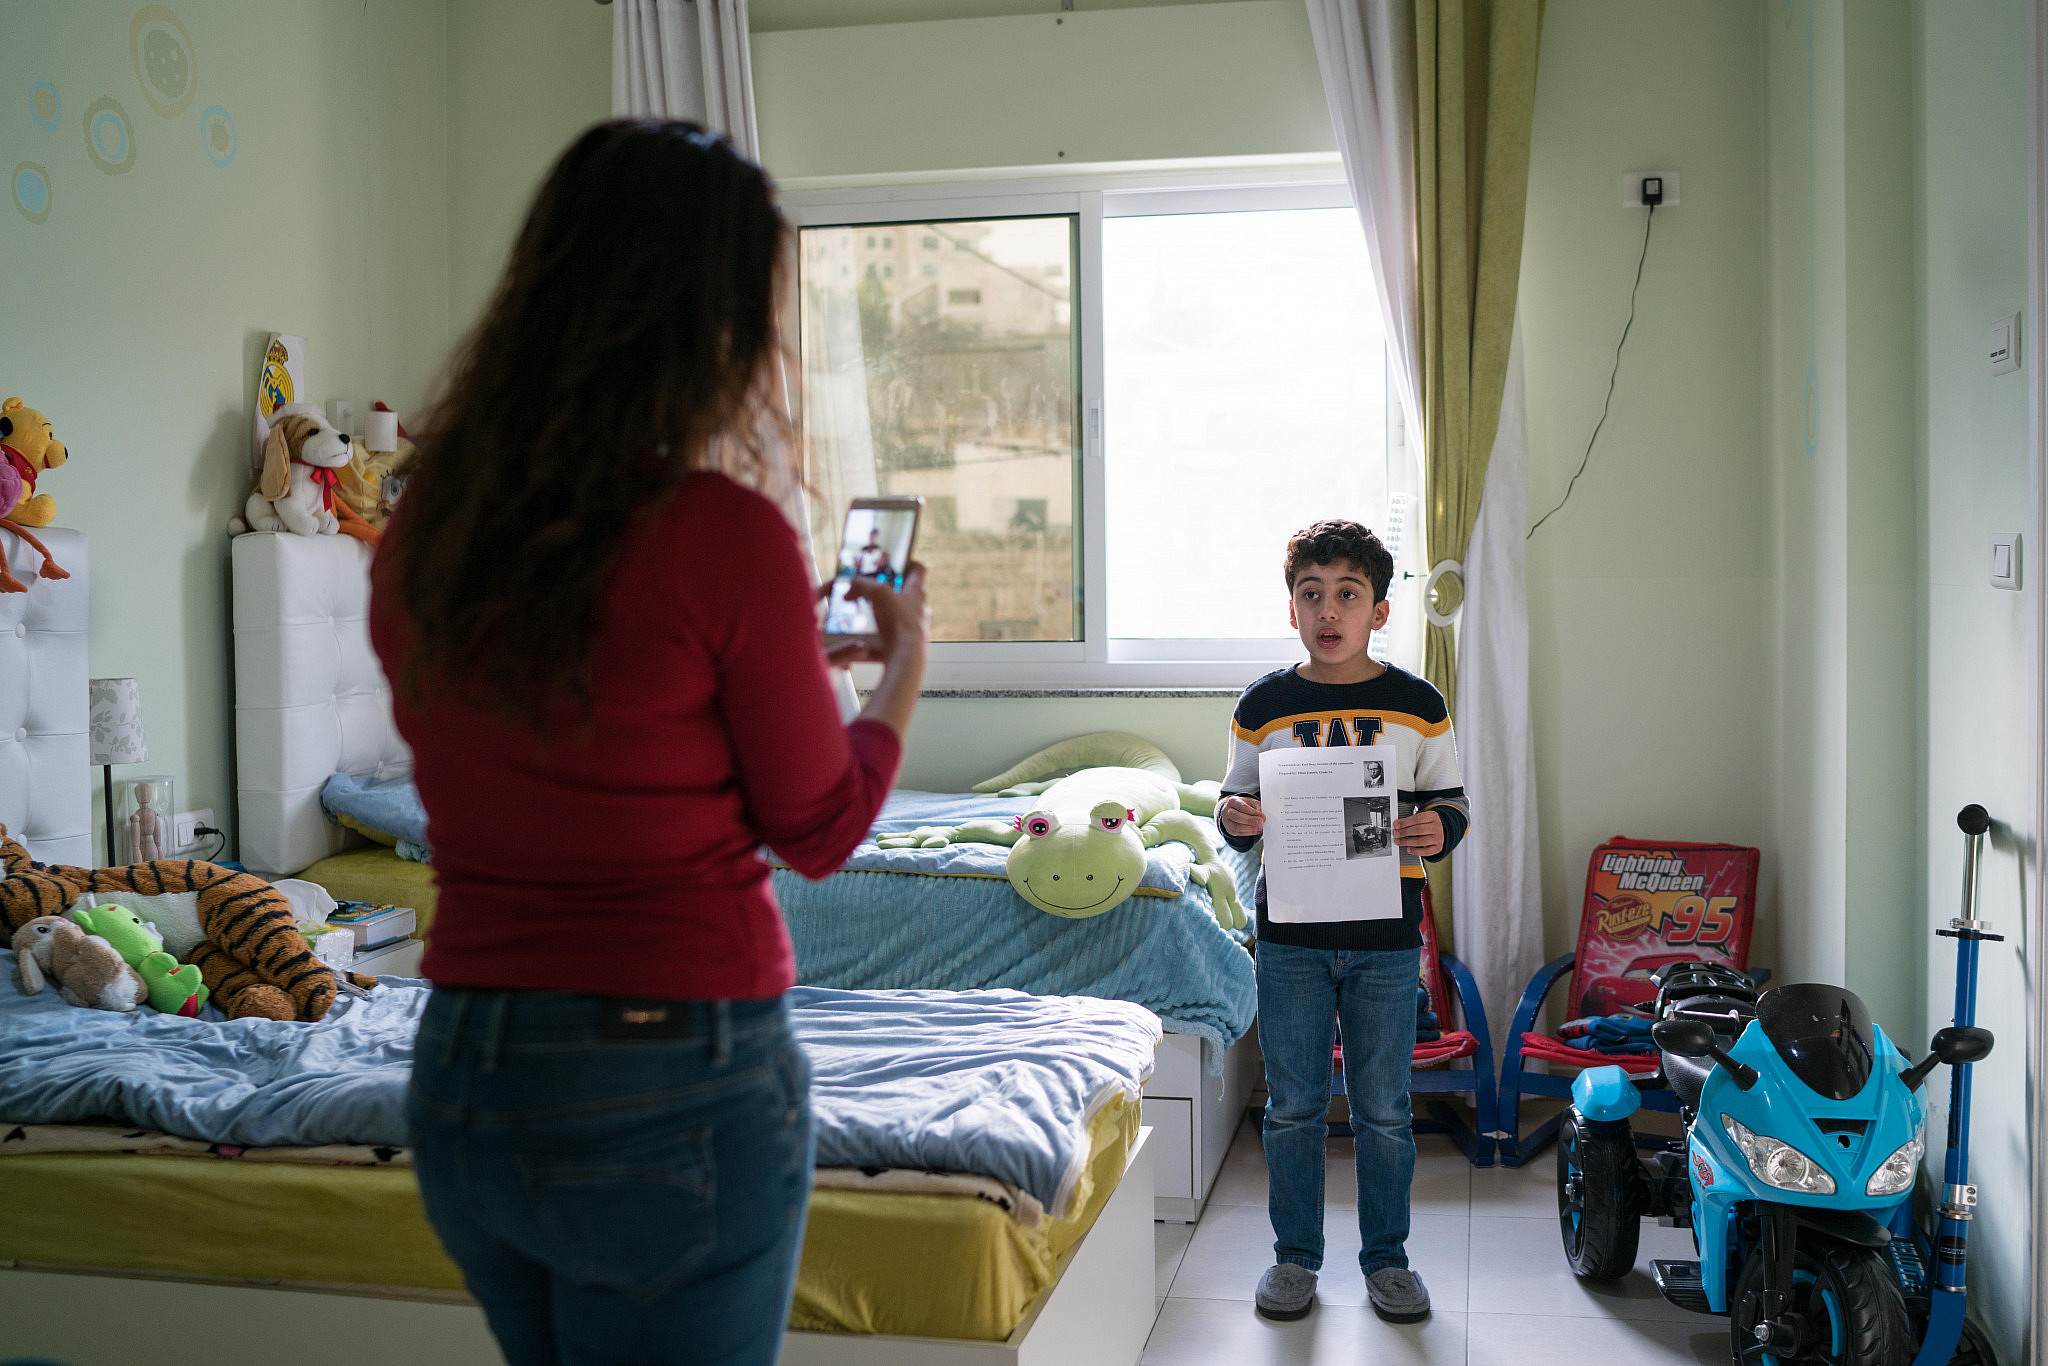 Carol Janine takes a video of her son Milan at their home in Bethlehem as he recites his homework, to send it to his teacher on March 11, 2020. (Samar Hazboun)